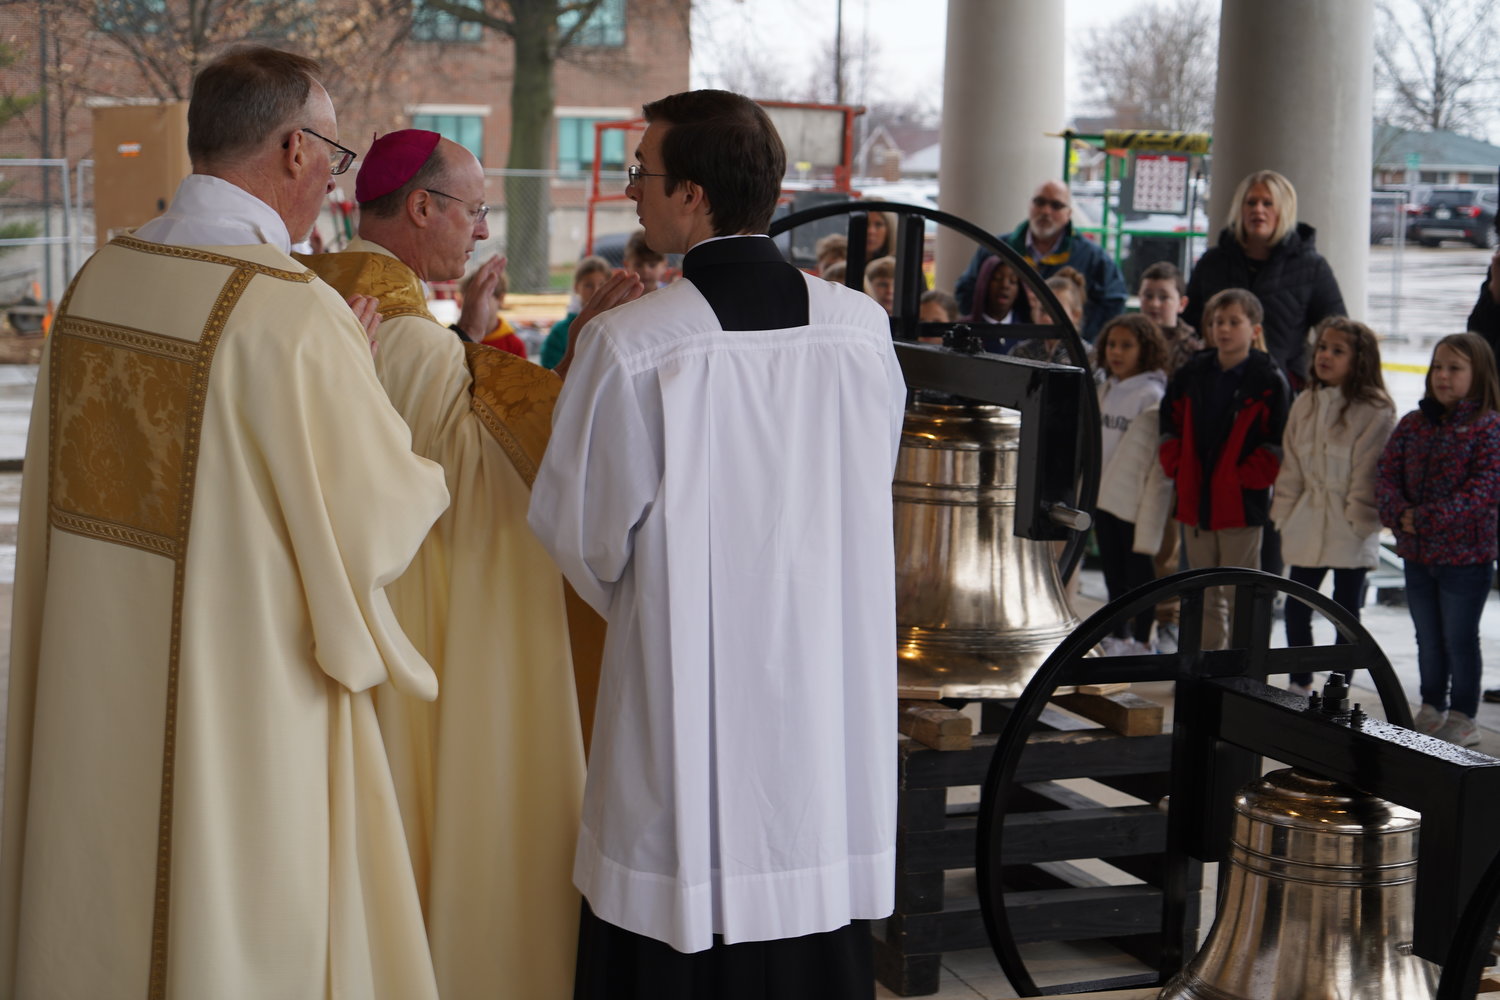 Bishop W. Shawn McKnight blesses the newly cast bells for the Cathedral of St. Joseph in Jefferson City on March 21.